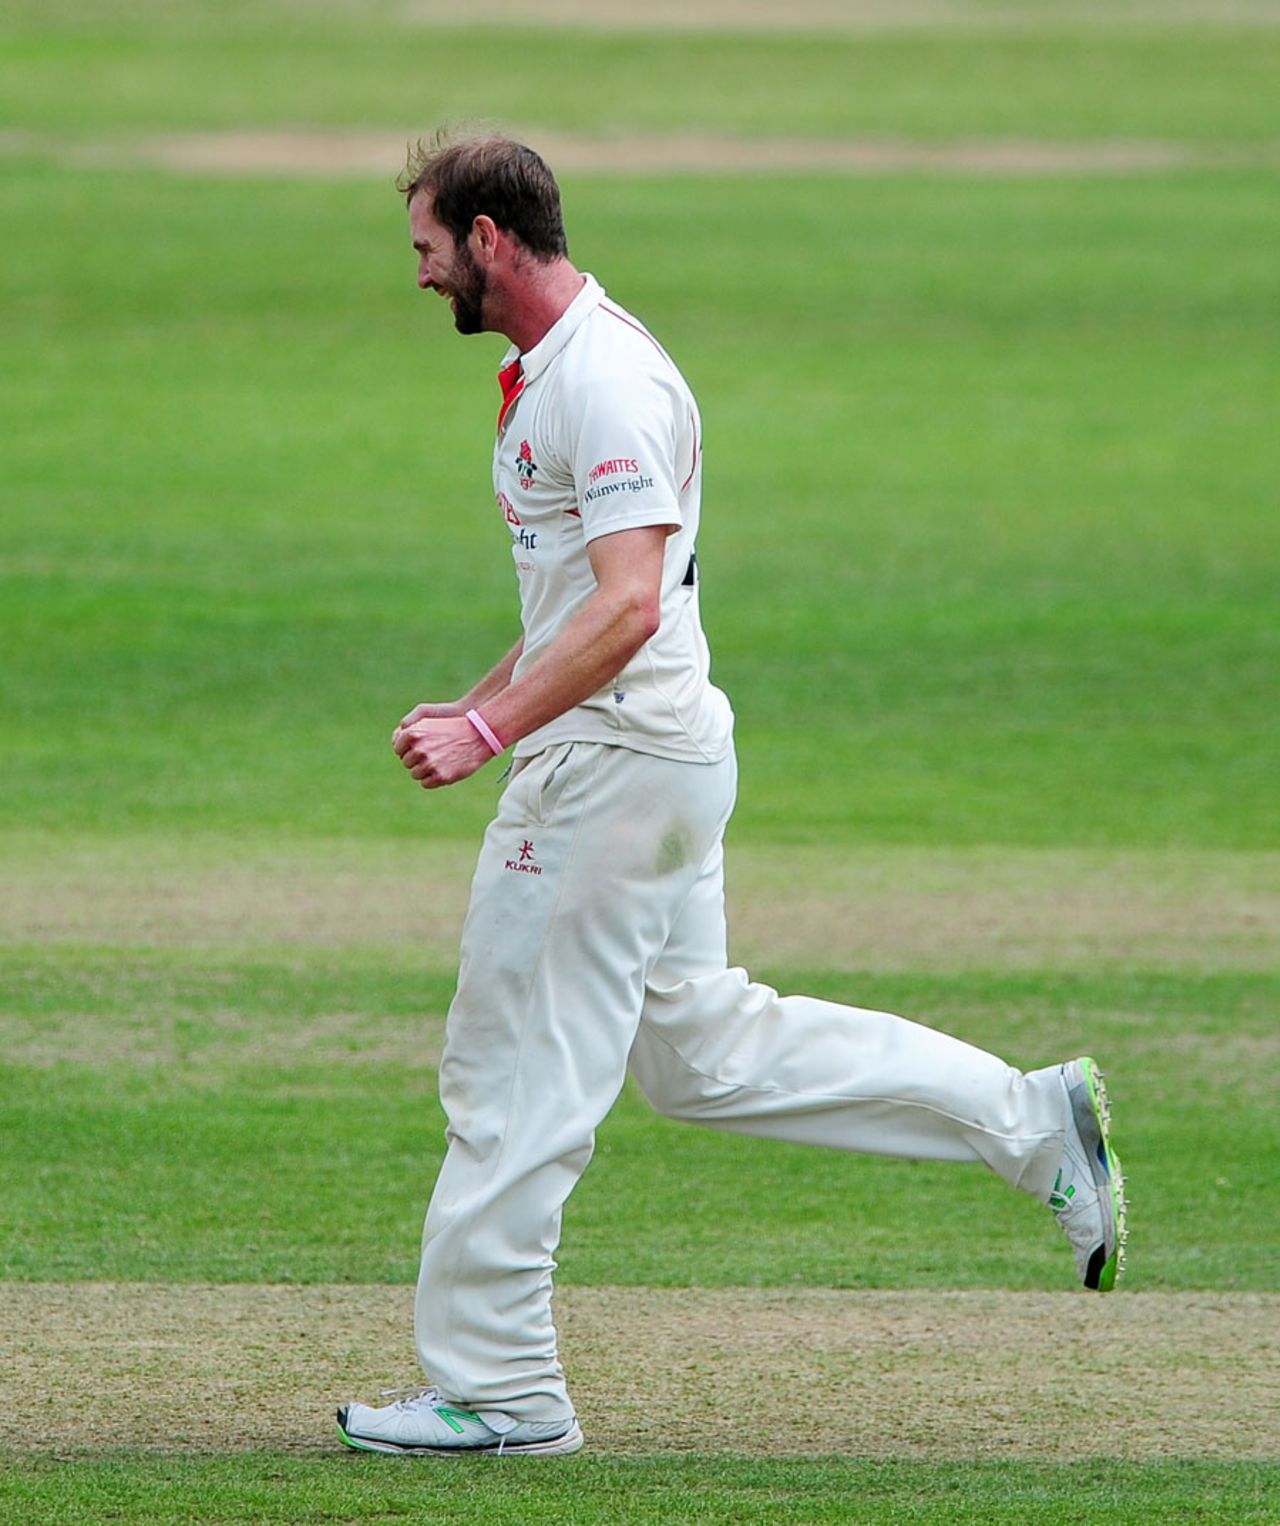 Tom Smith took his 42nd wicket to go joint top of the Division One standings, Somerset v Lancashire, County Championship, Division One, Taunton, 3rd day, July 1, 2014